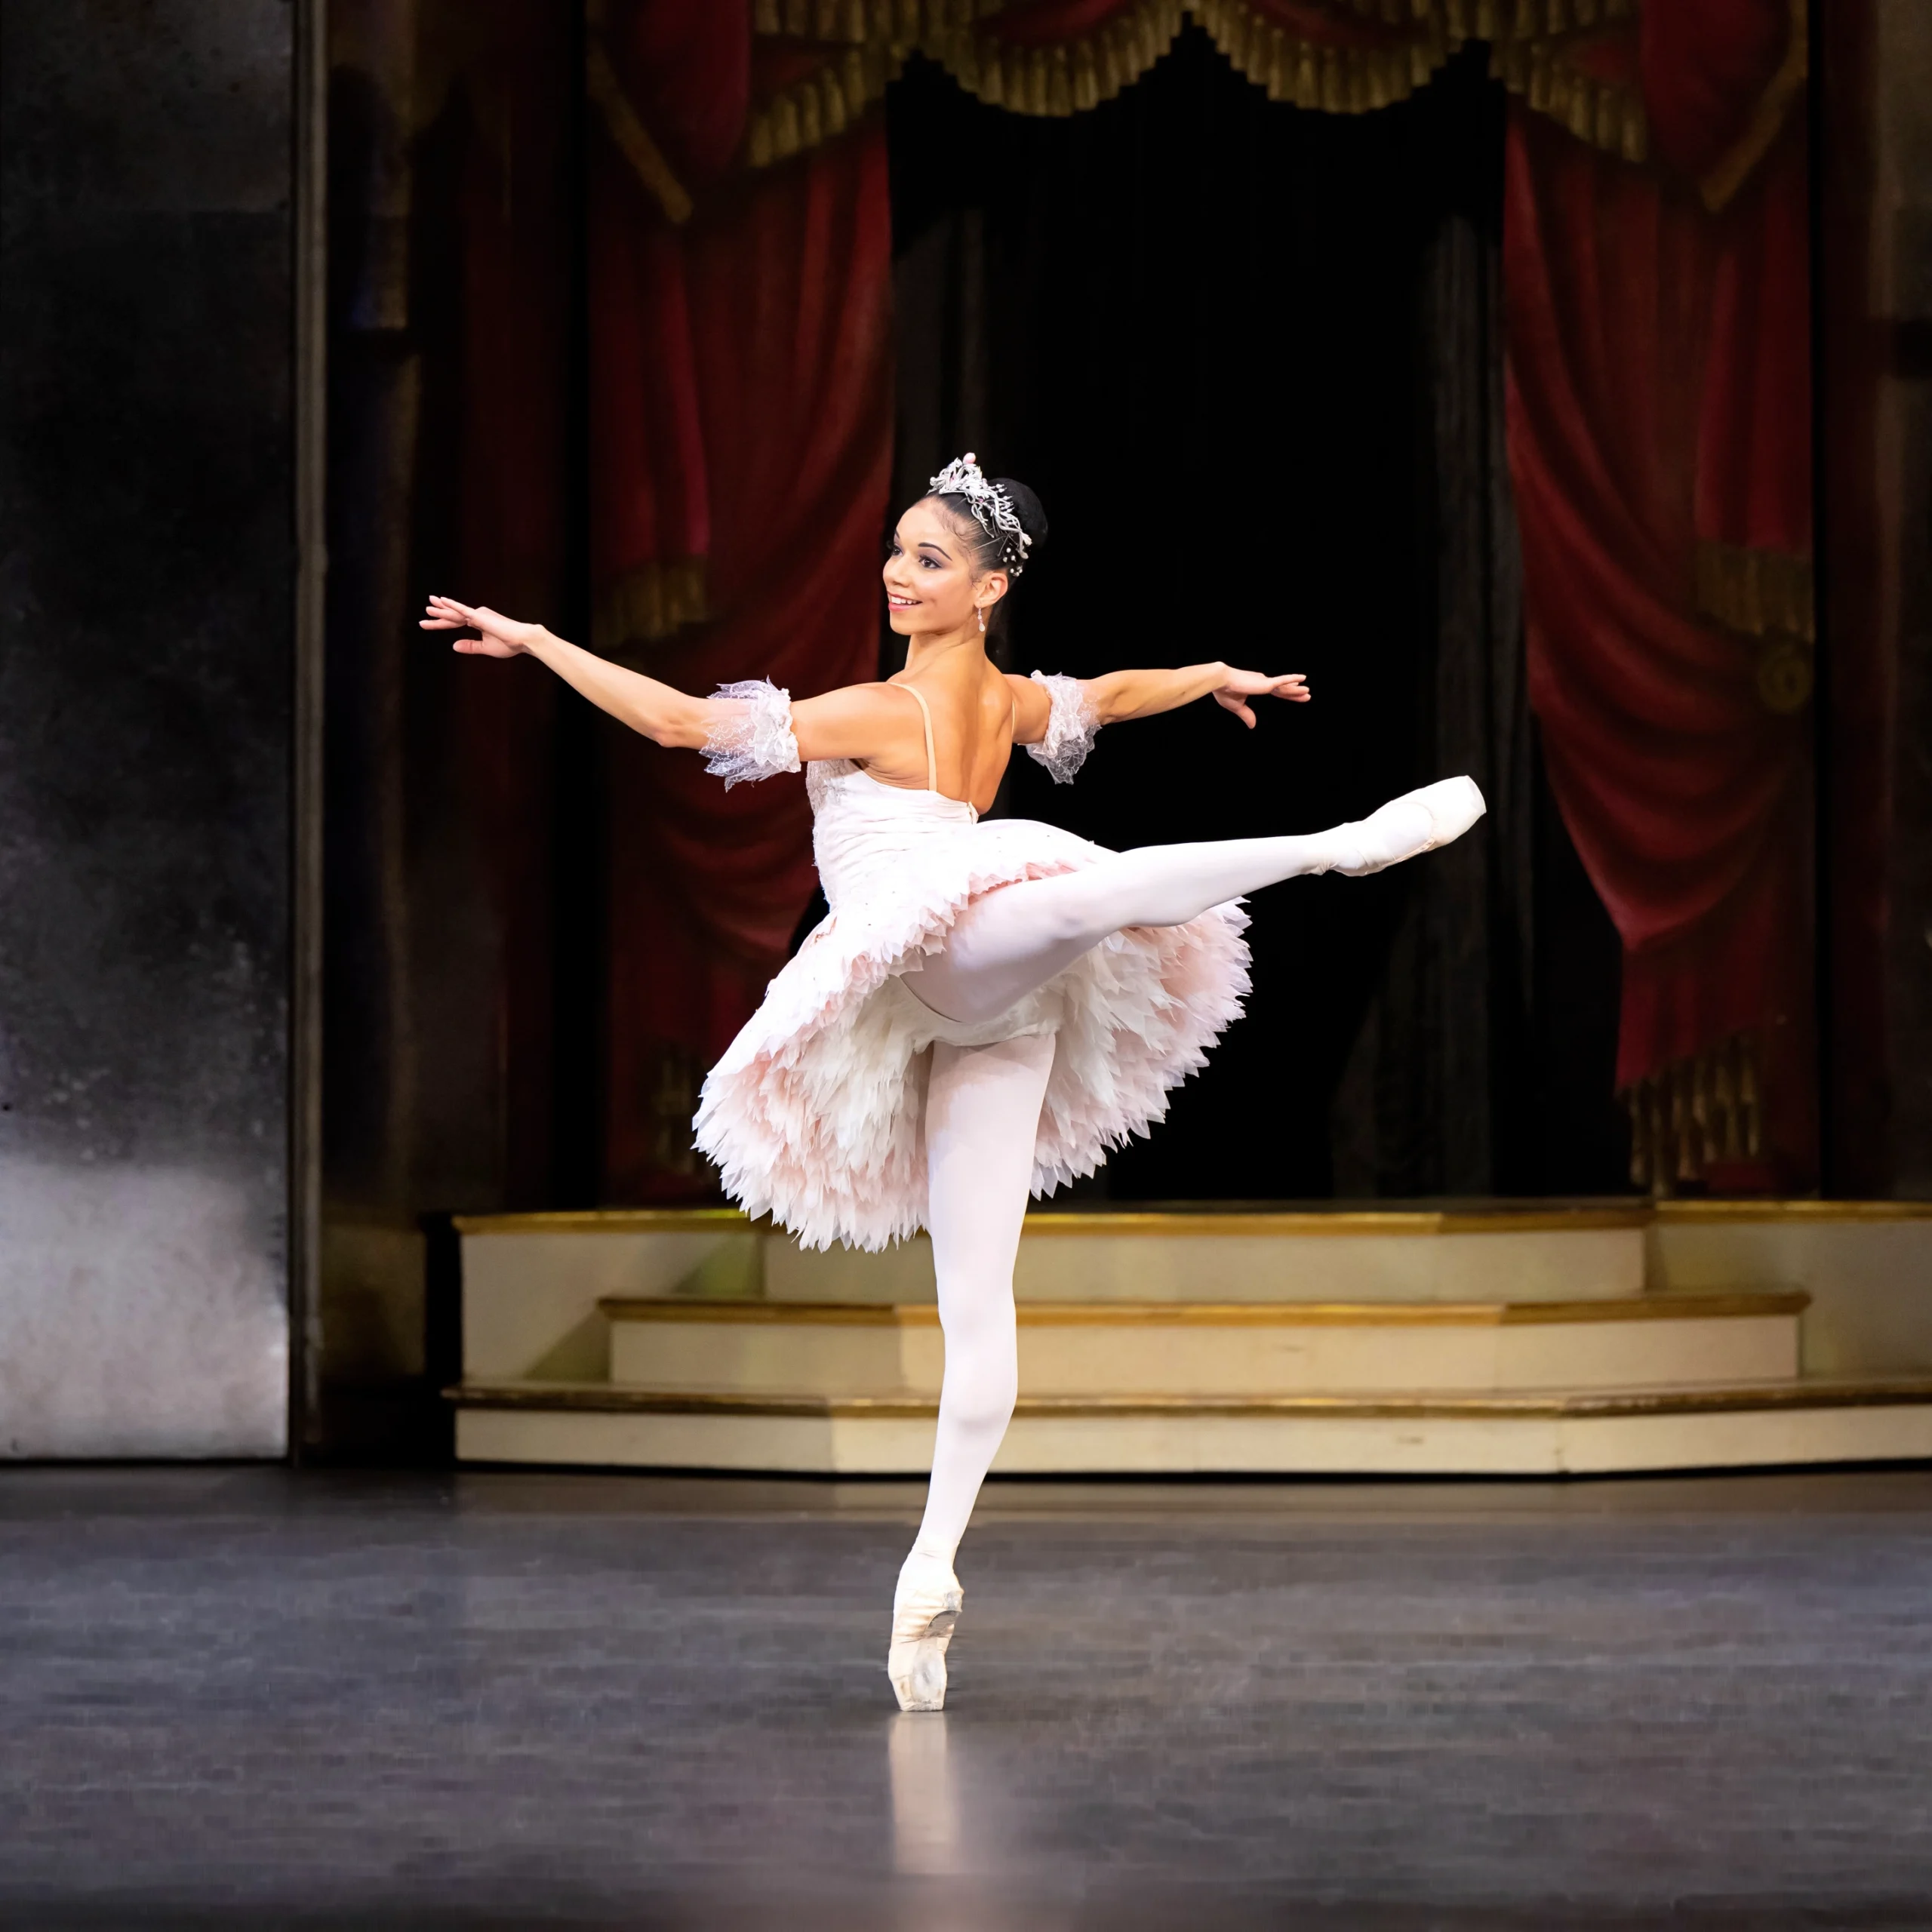 Céline Gittens dances a solo during a performance of Nutcracker. She faces the upstage right corner and poses in attitude back, her arms in second position as she looks back over her left shoulder. She wears a light pink tutu, pink tights, and pink pointe shoes, and a silvery tiara. She has a bright smile on her face.